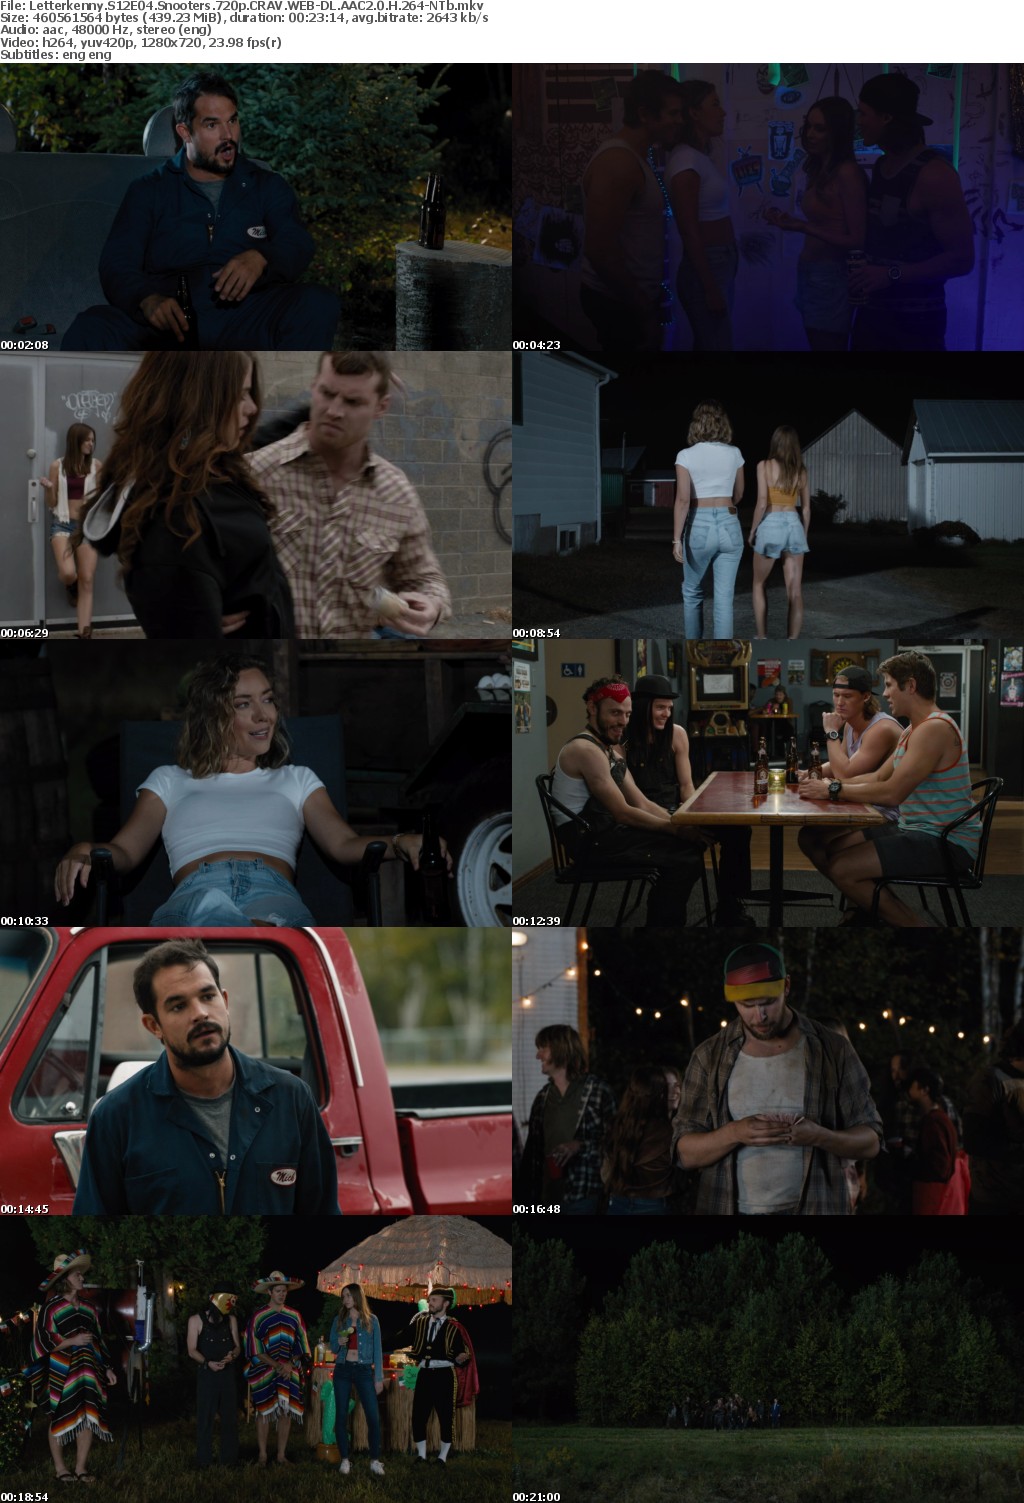 Letterkenny S12E04 Snooters 720p CRAV WEB-DL AAC2 0 H 264-NTb